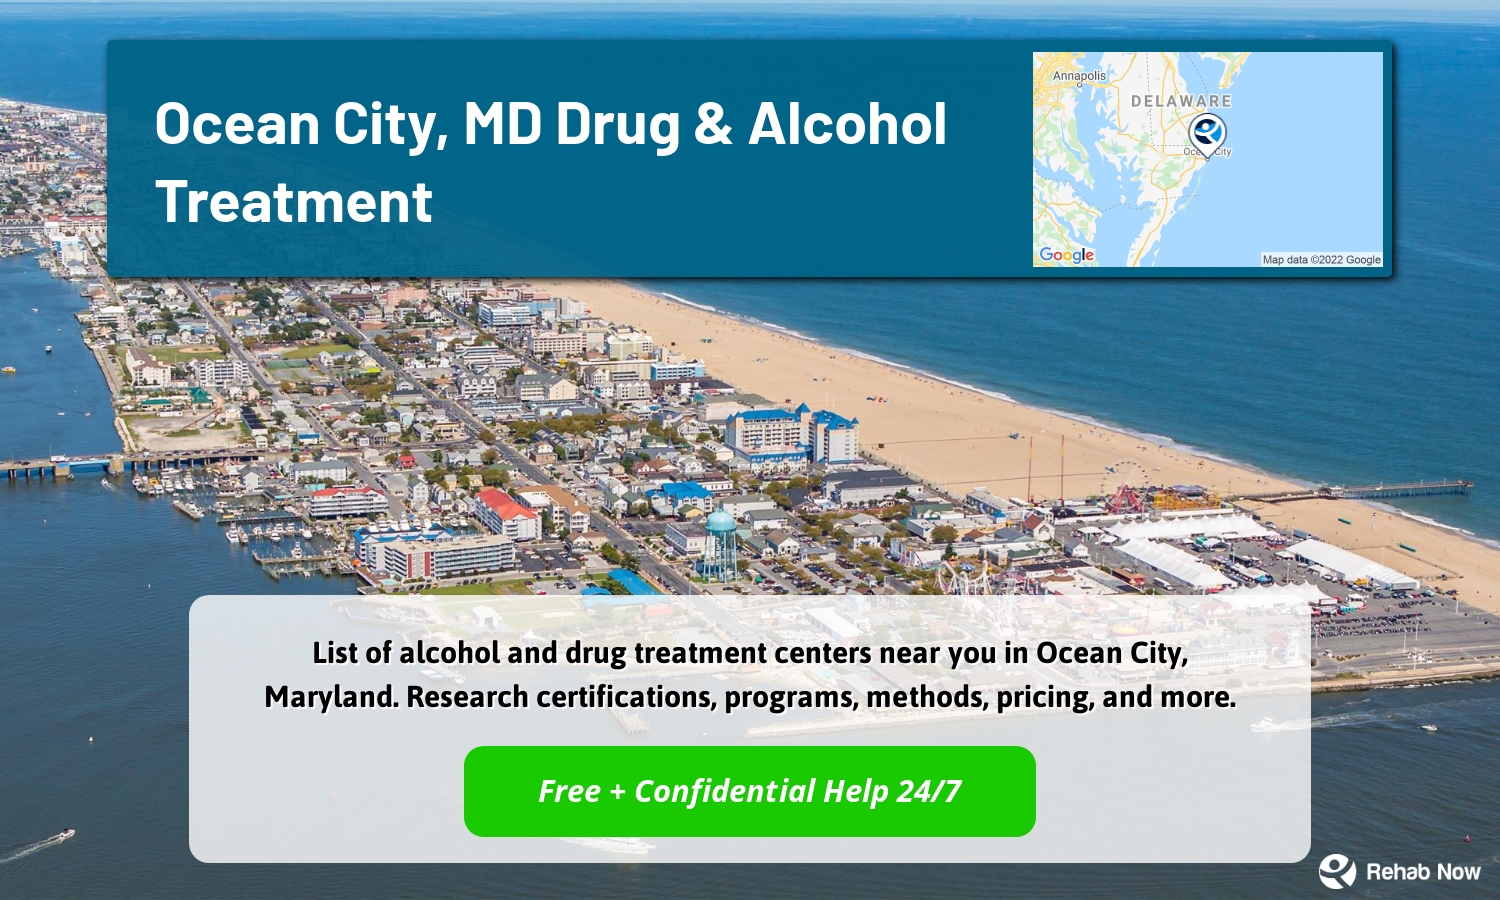 List of alcohol and drug treatment centers near you in Ocean City, Maryland. Research certifications, programs, methods, pricing, and more.